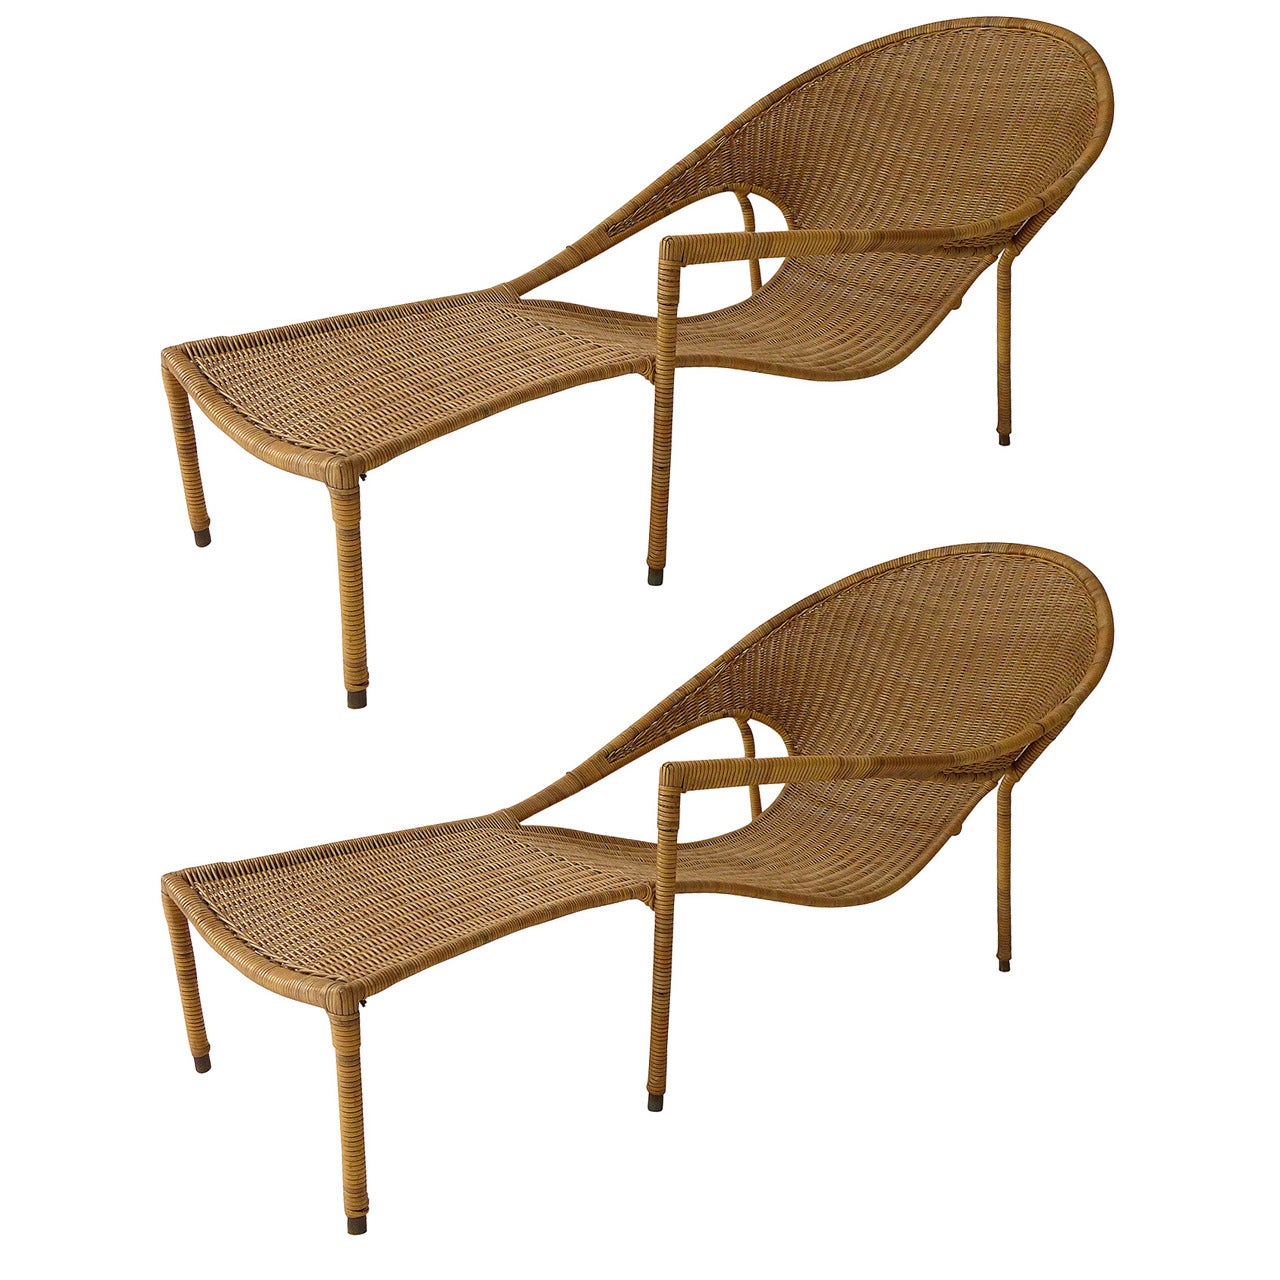 Pair of Sculptural Wicker Lounge Chairs by Francis Mair